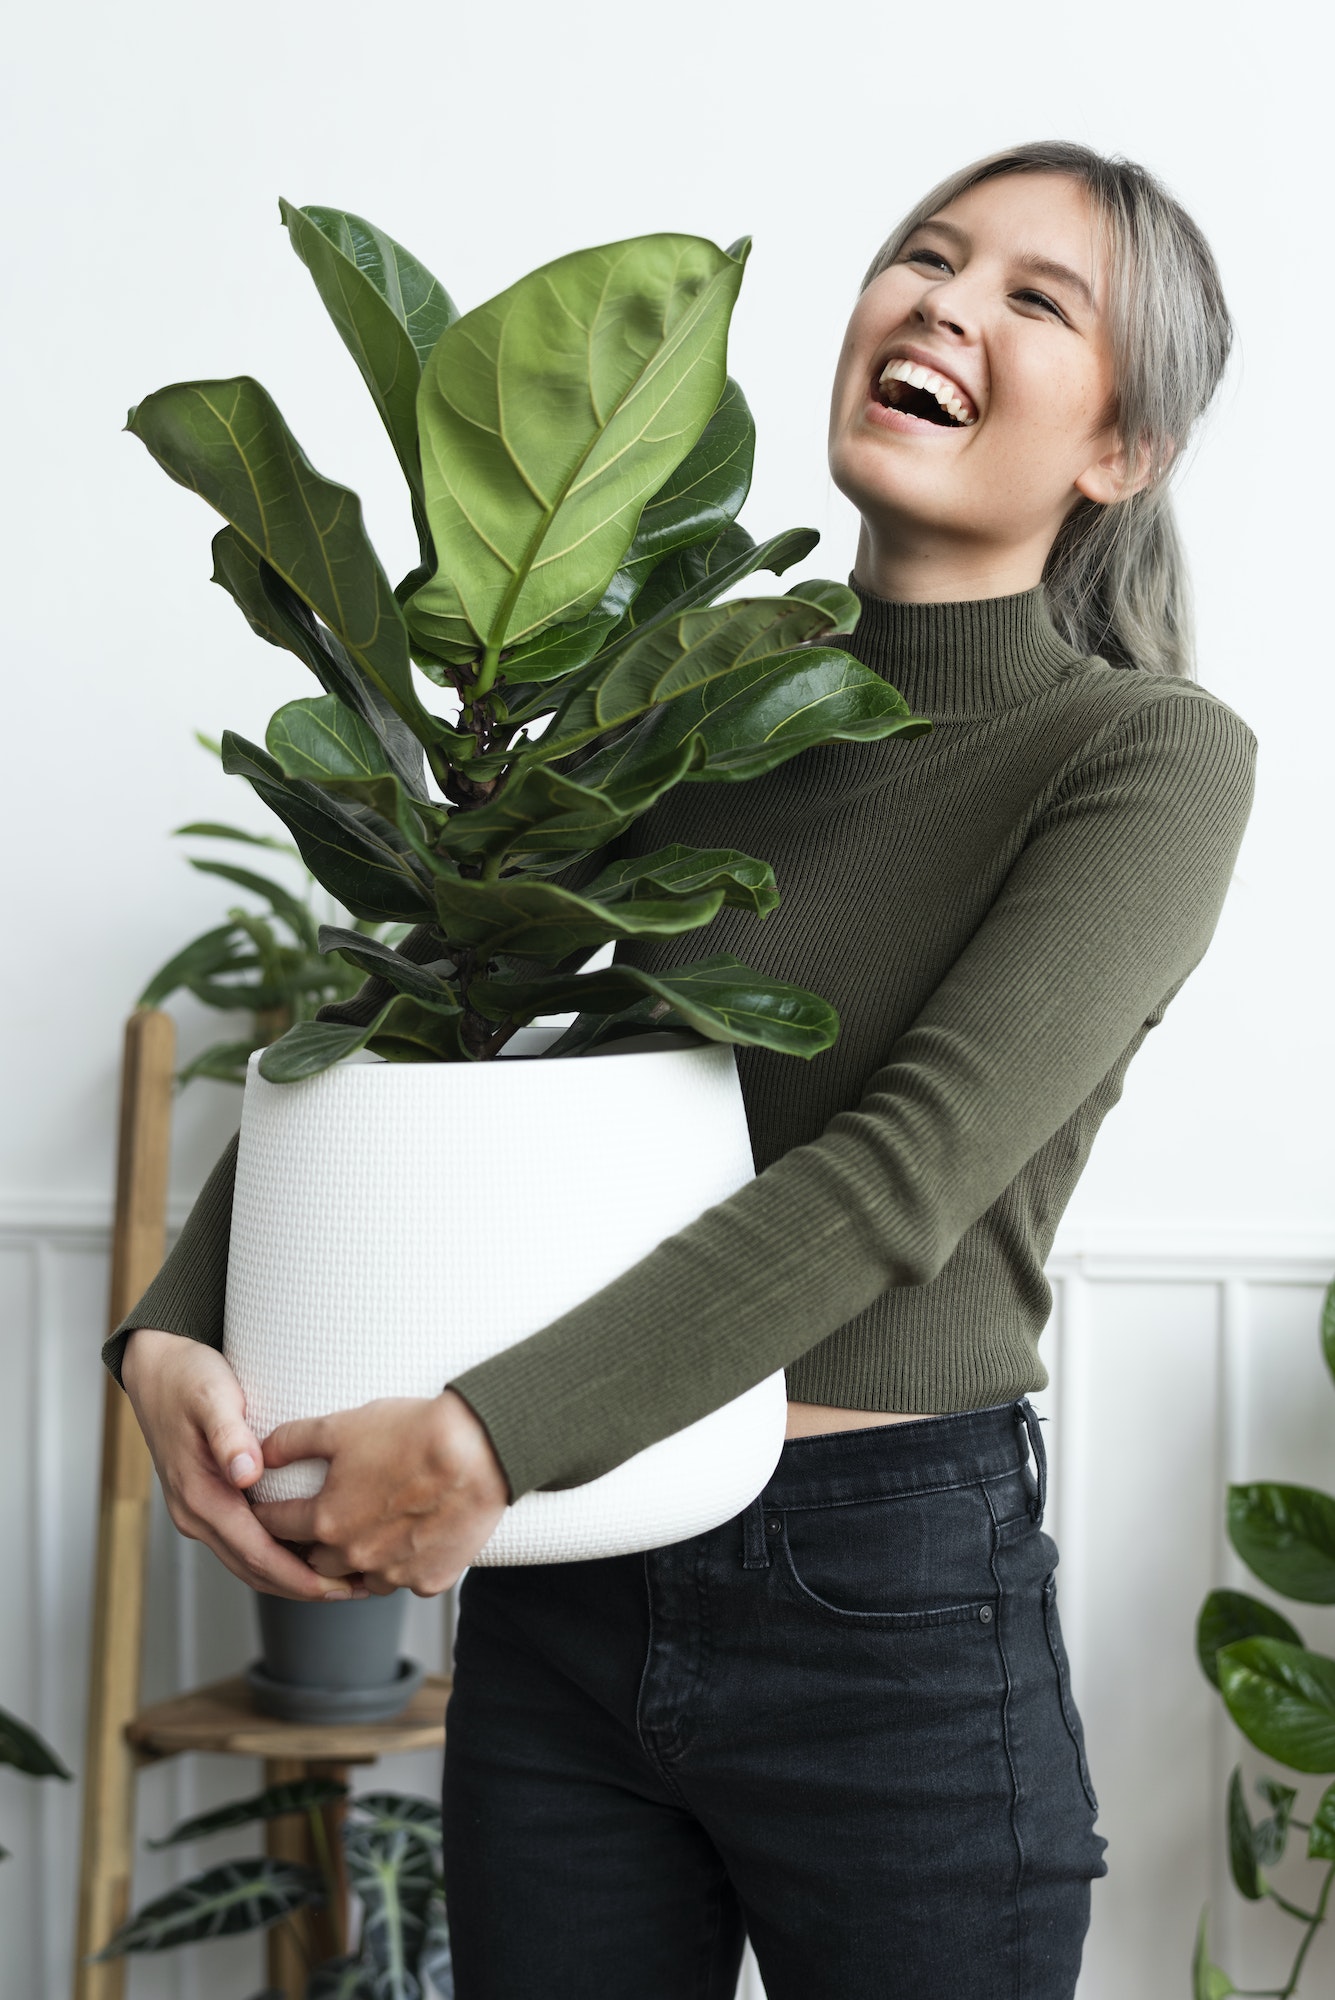 Happy woman carrying a houseplant